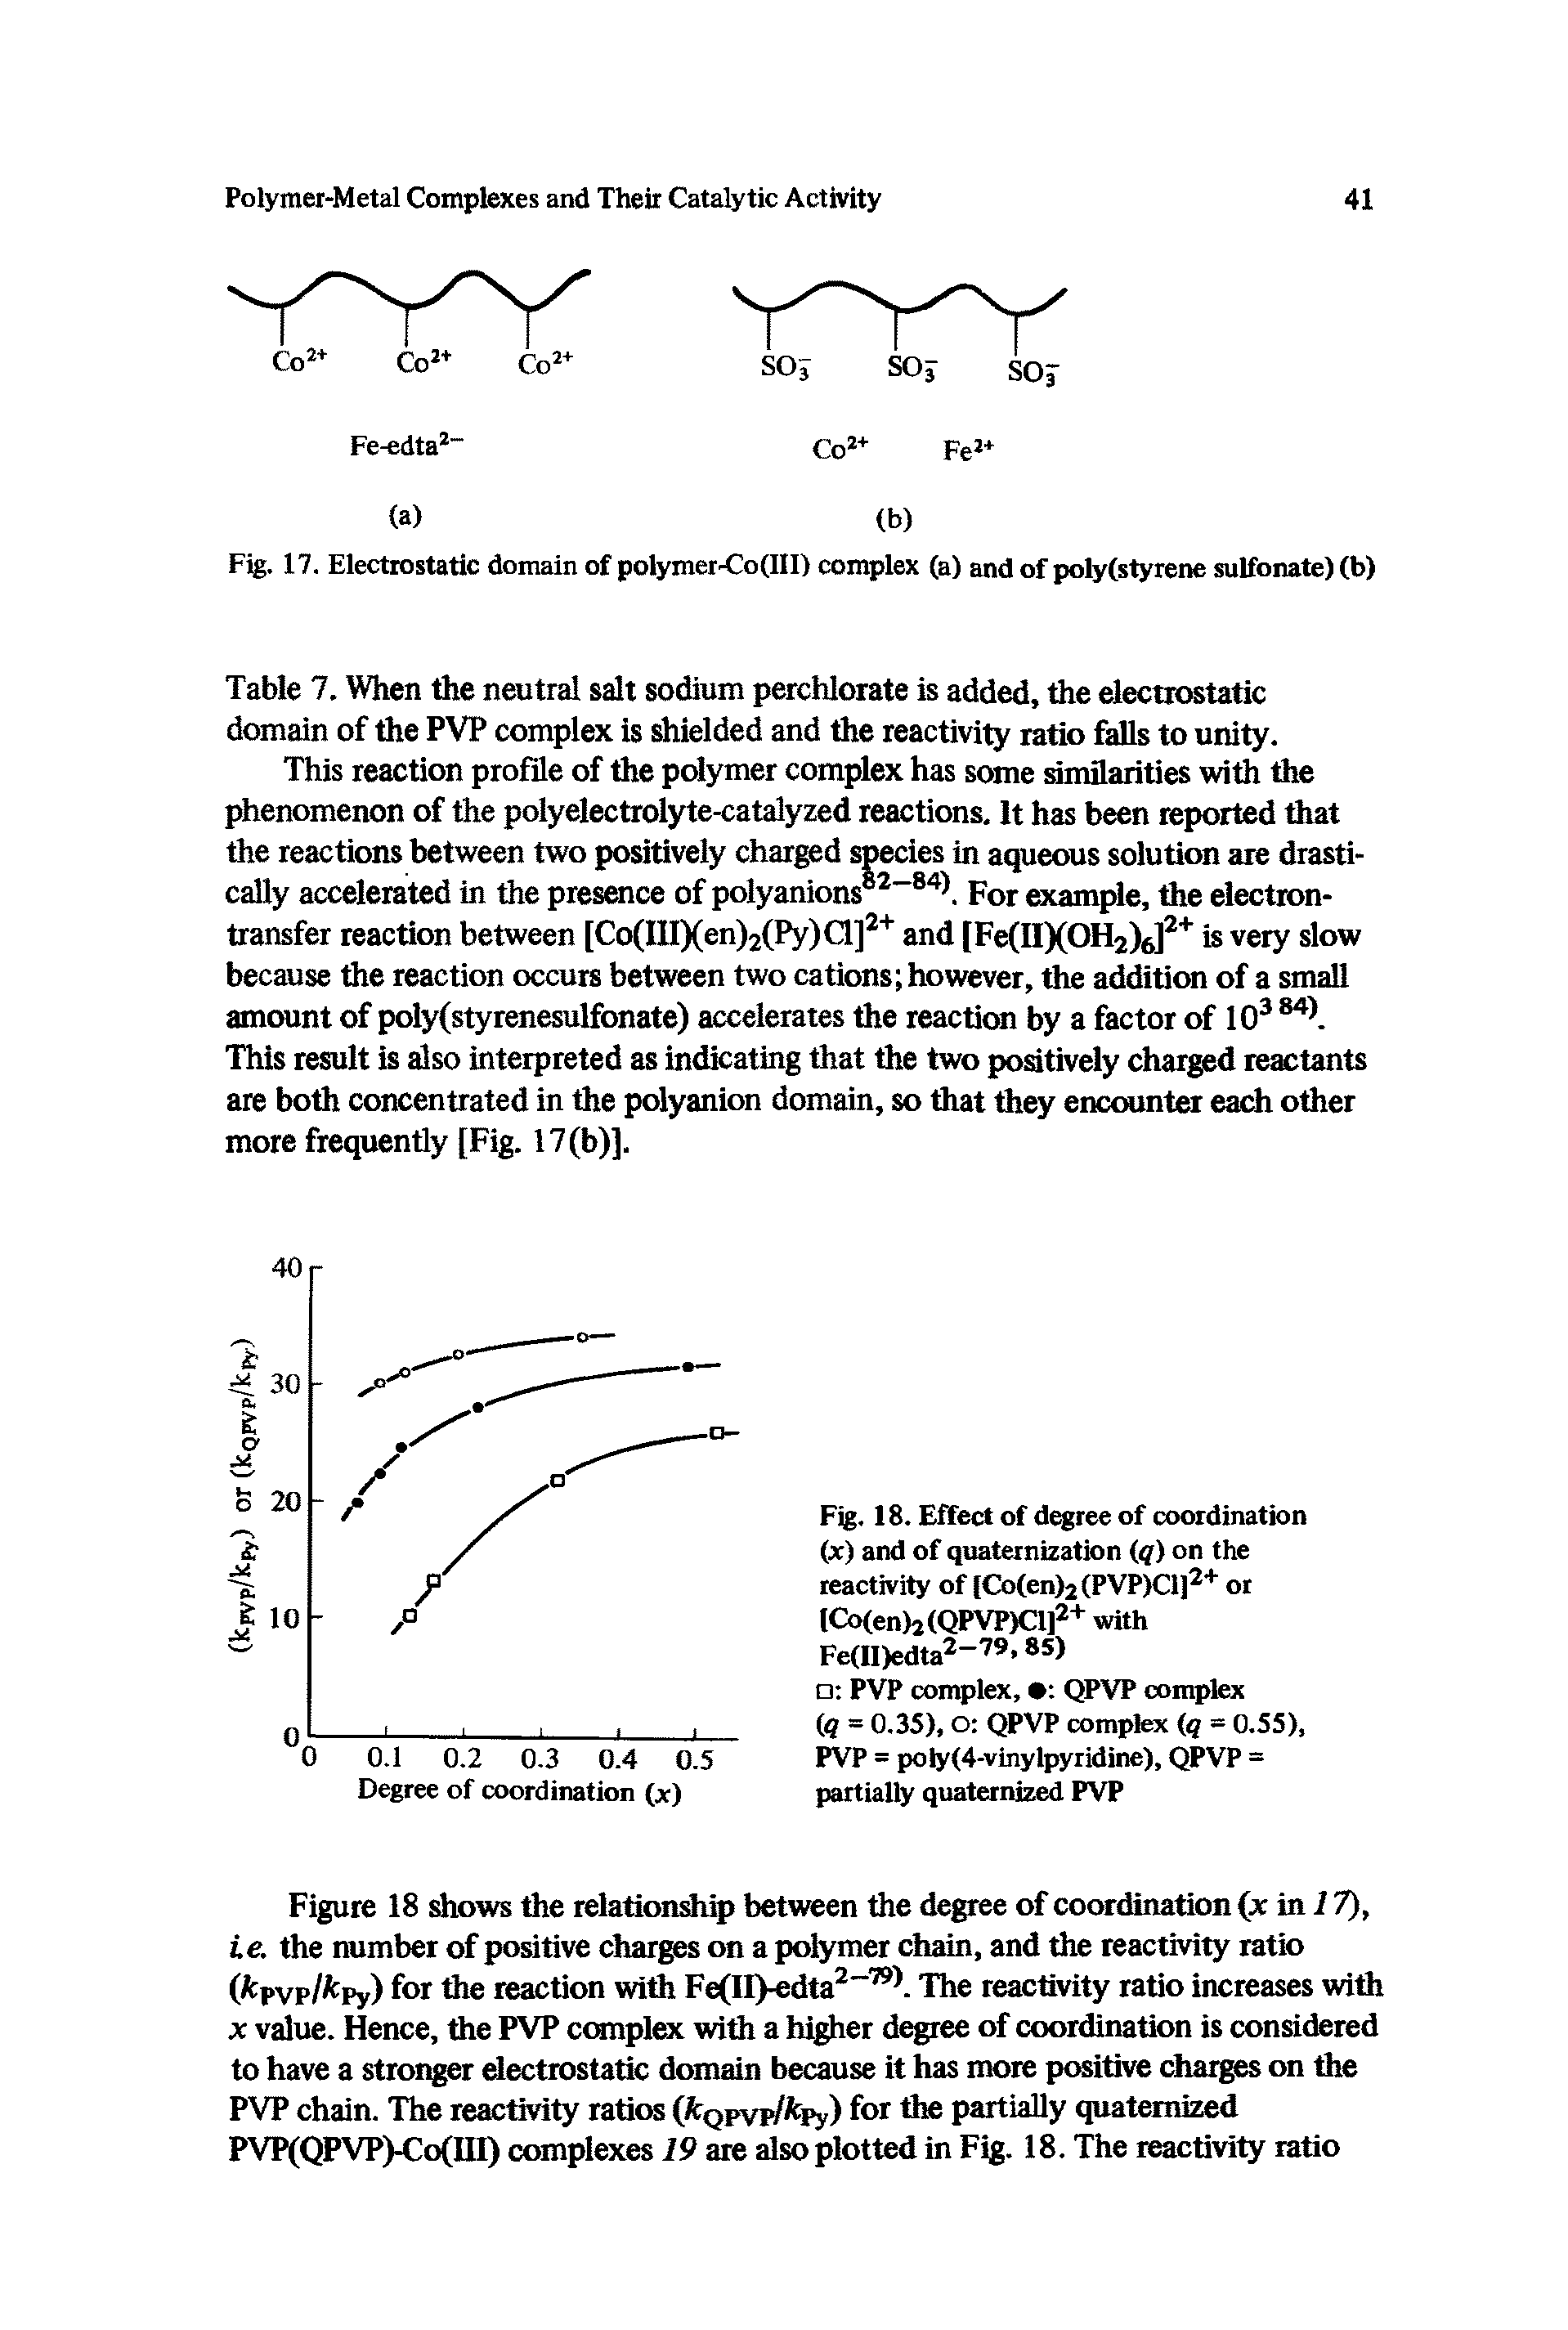 Figure 18 shows the relationship between the degree of coordination (x in 17), ie. the number of positive charges on a polymer chain, and the reactivity ratio (fcpyp/fcpy) for the reaction with Fe(II)-edta2 79). The reactivity ratio increases with x value. Hence, the PVP complex with a higher degree of coordination is considered to have a stronger electrostatic domain because it has more positive charges on the PVP chain. The reactivity ratios ( Qpvp/fcpy) for the partially quaternized PVP(QPVP)-Co(III) complexes 19 are also plotted in Fig. 18. The reactivity ratio...